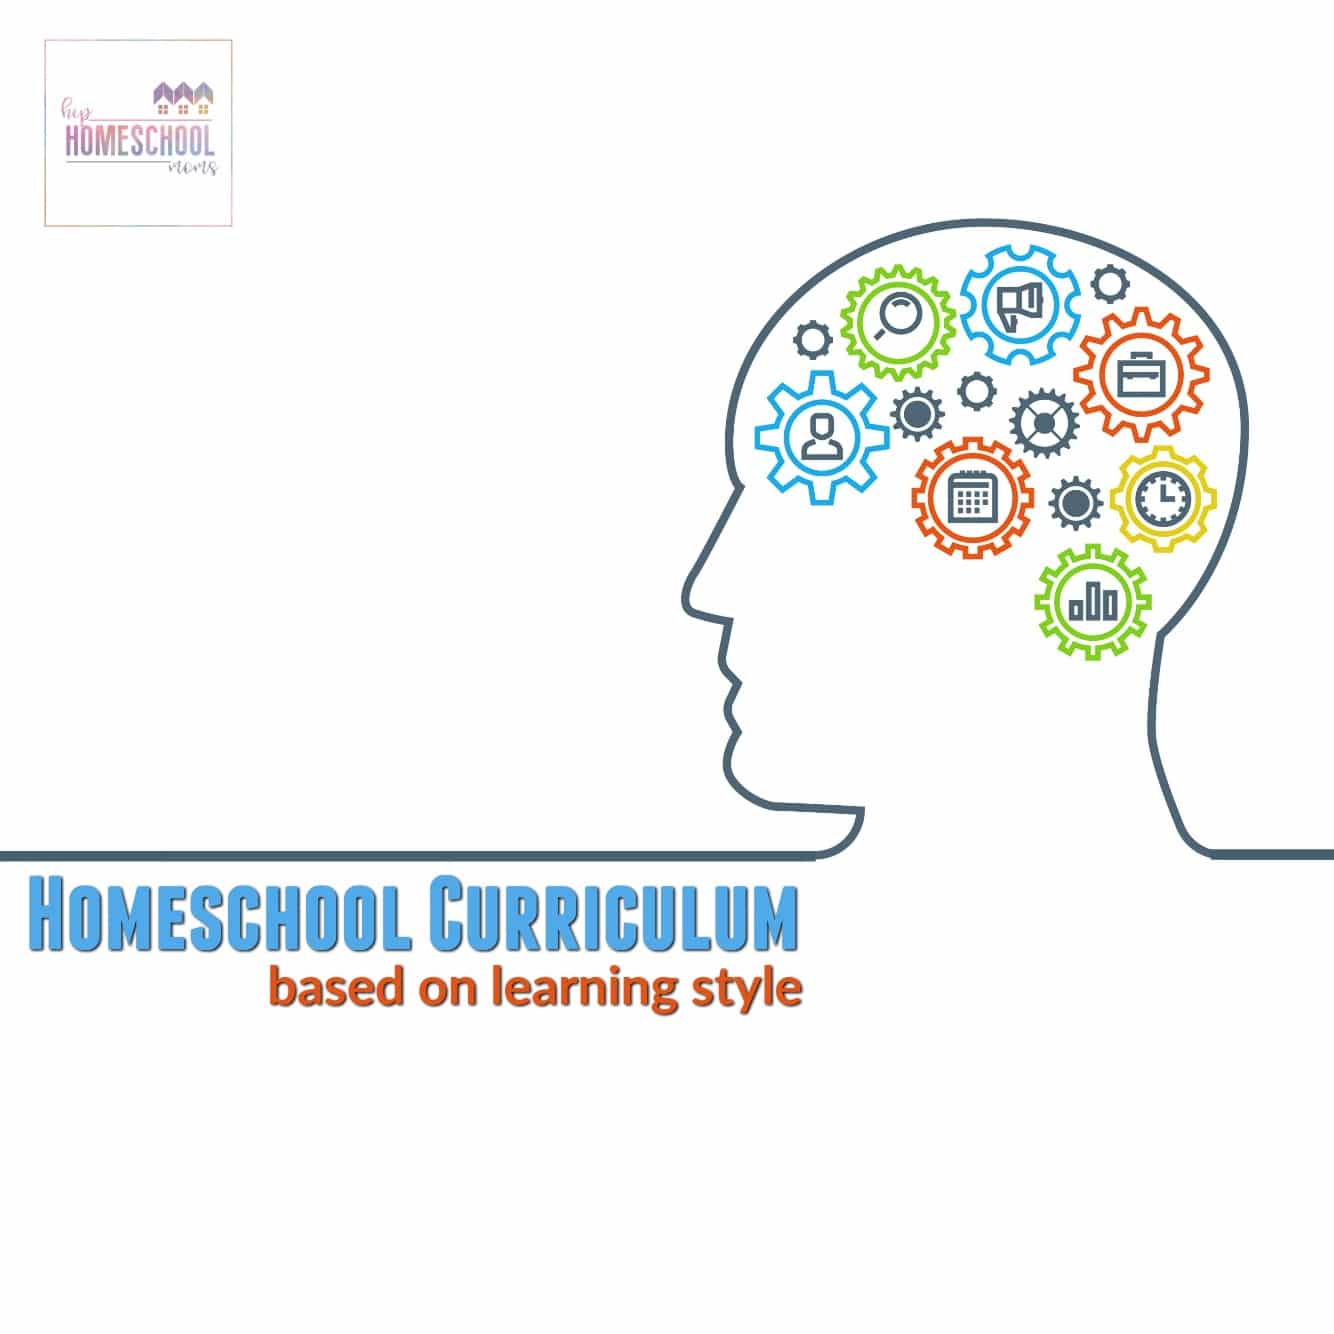 Homeschool Curriculum Based on Learning Style